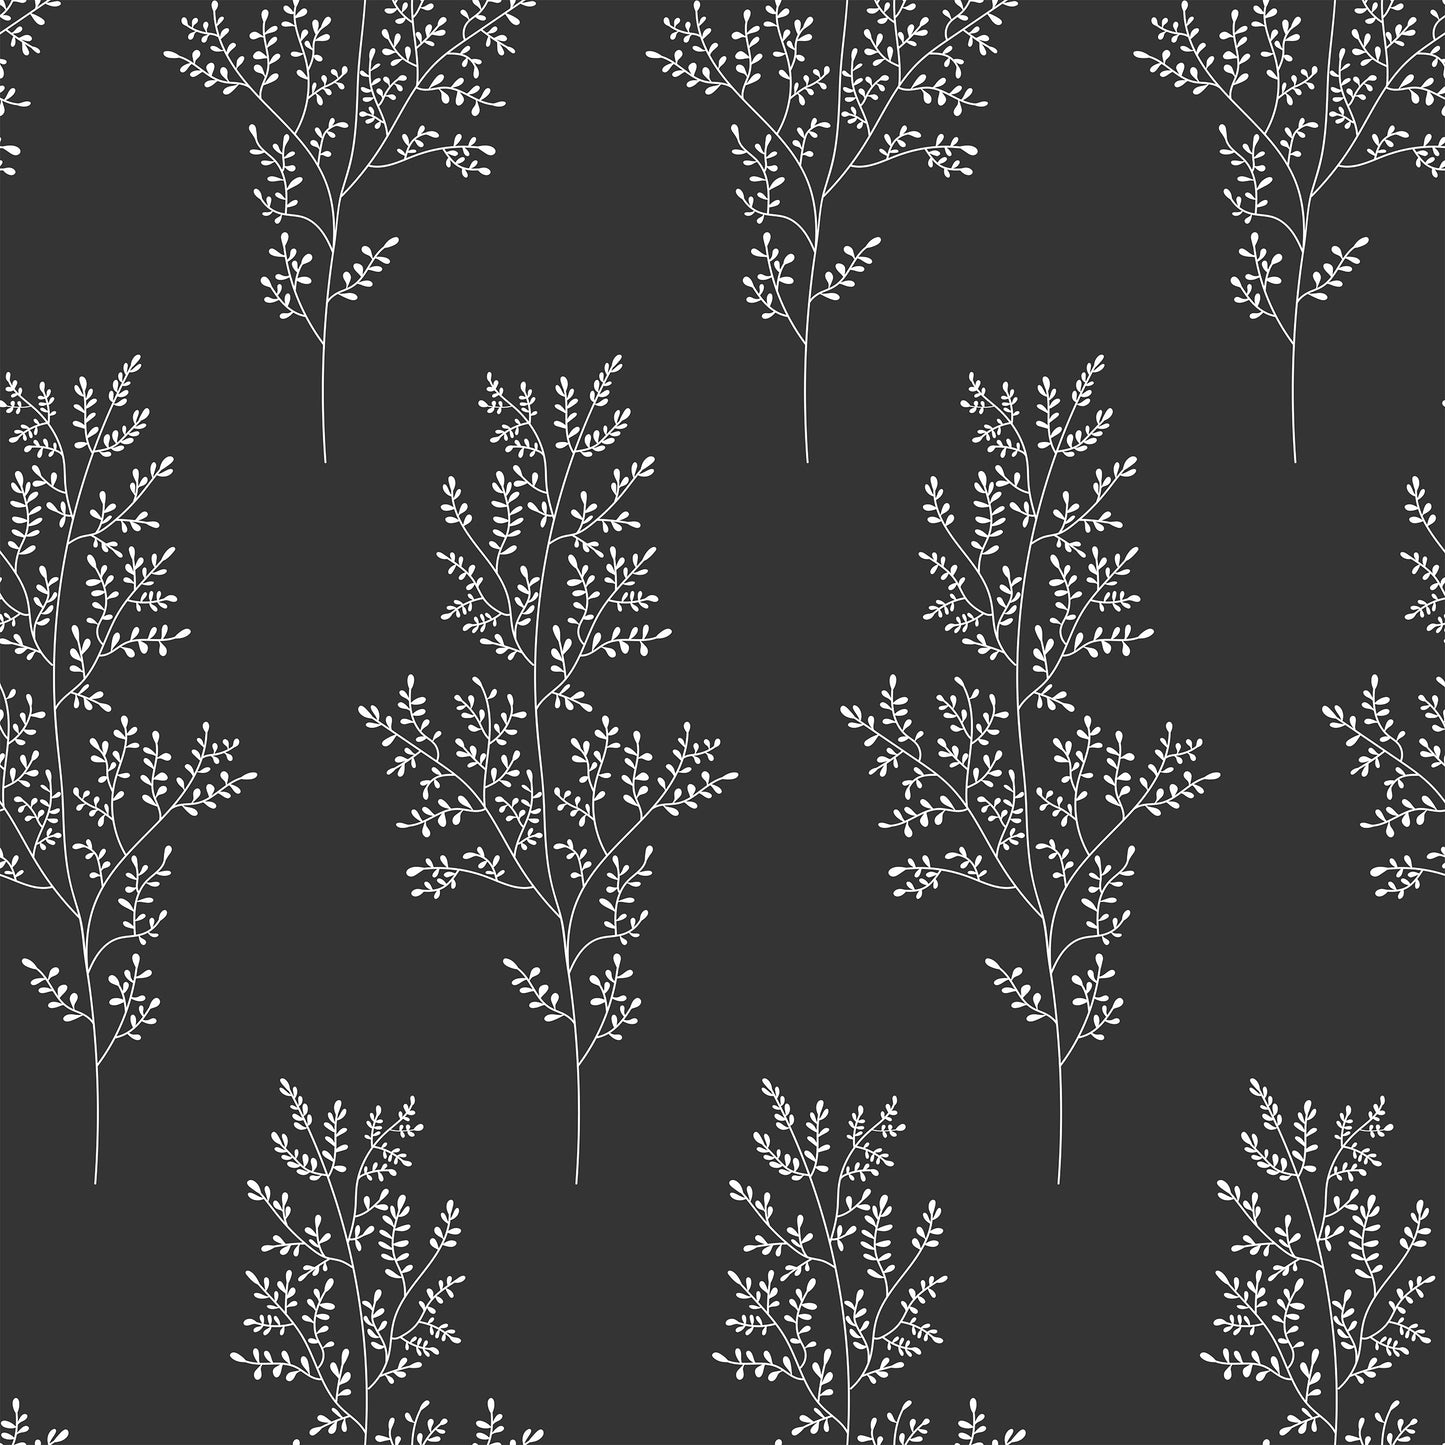 PVC-free peel & stick wallpaper for a sustainable choice